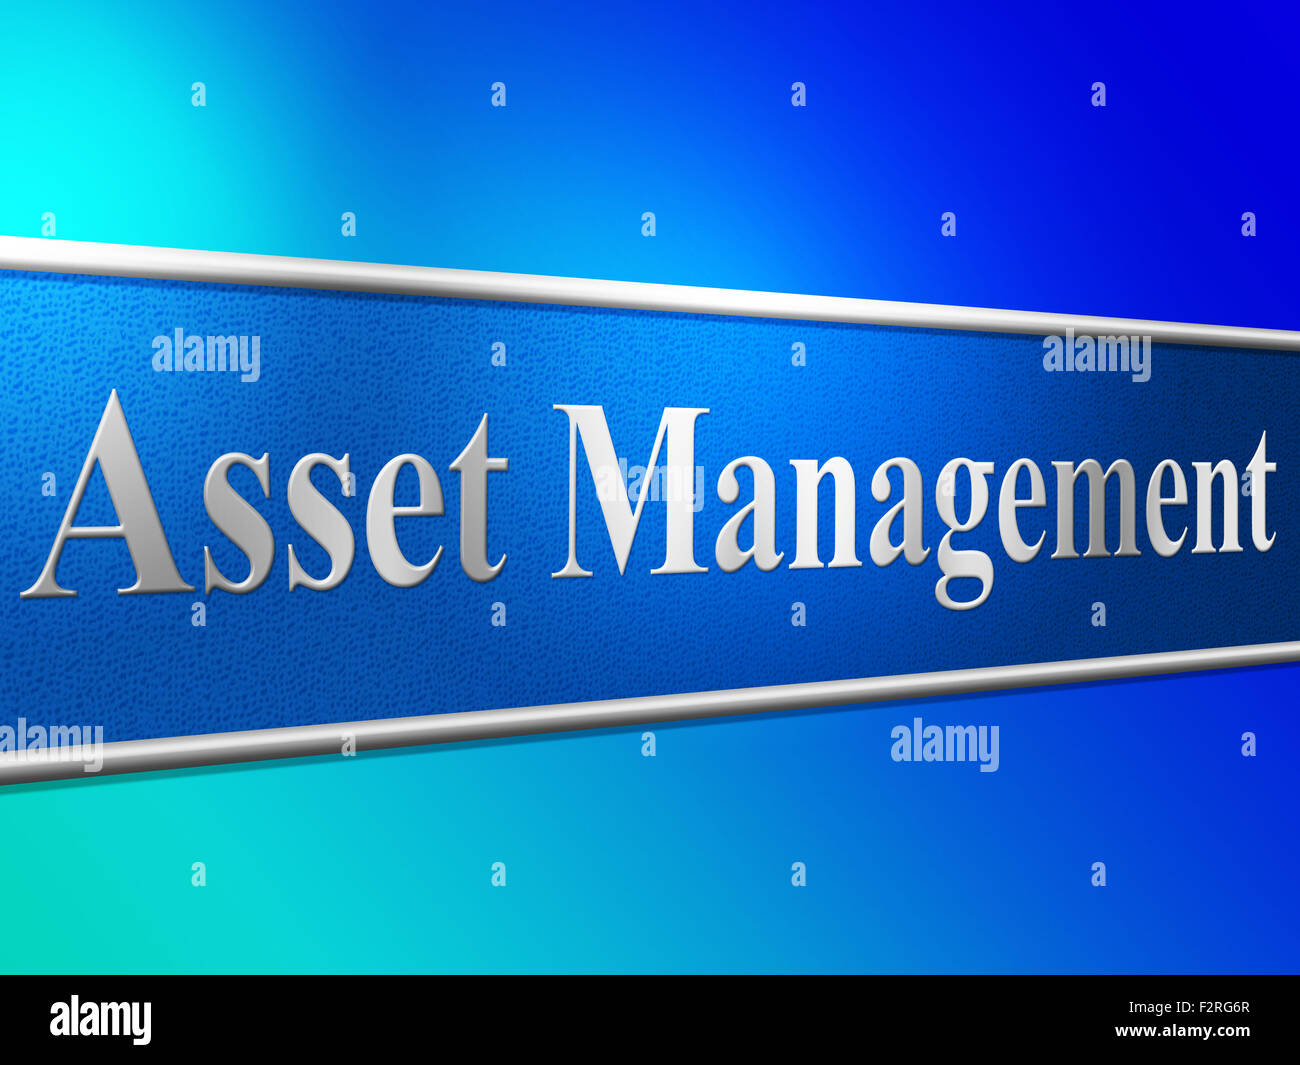 Management Asset Indicating Business Assets And Wealth Stock Photo